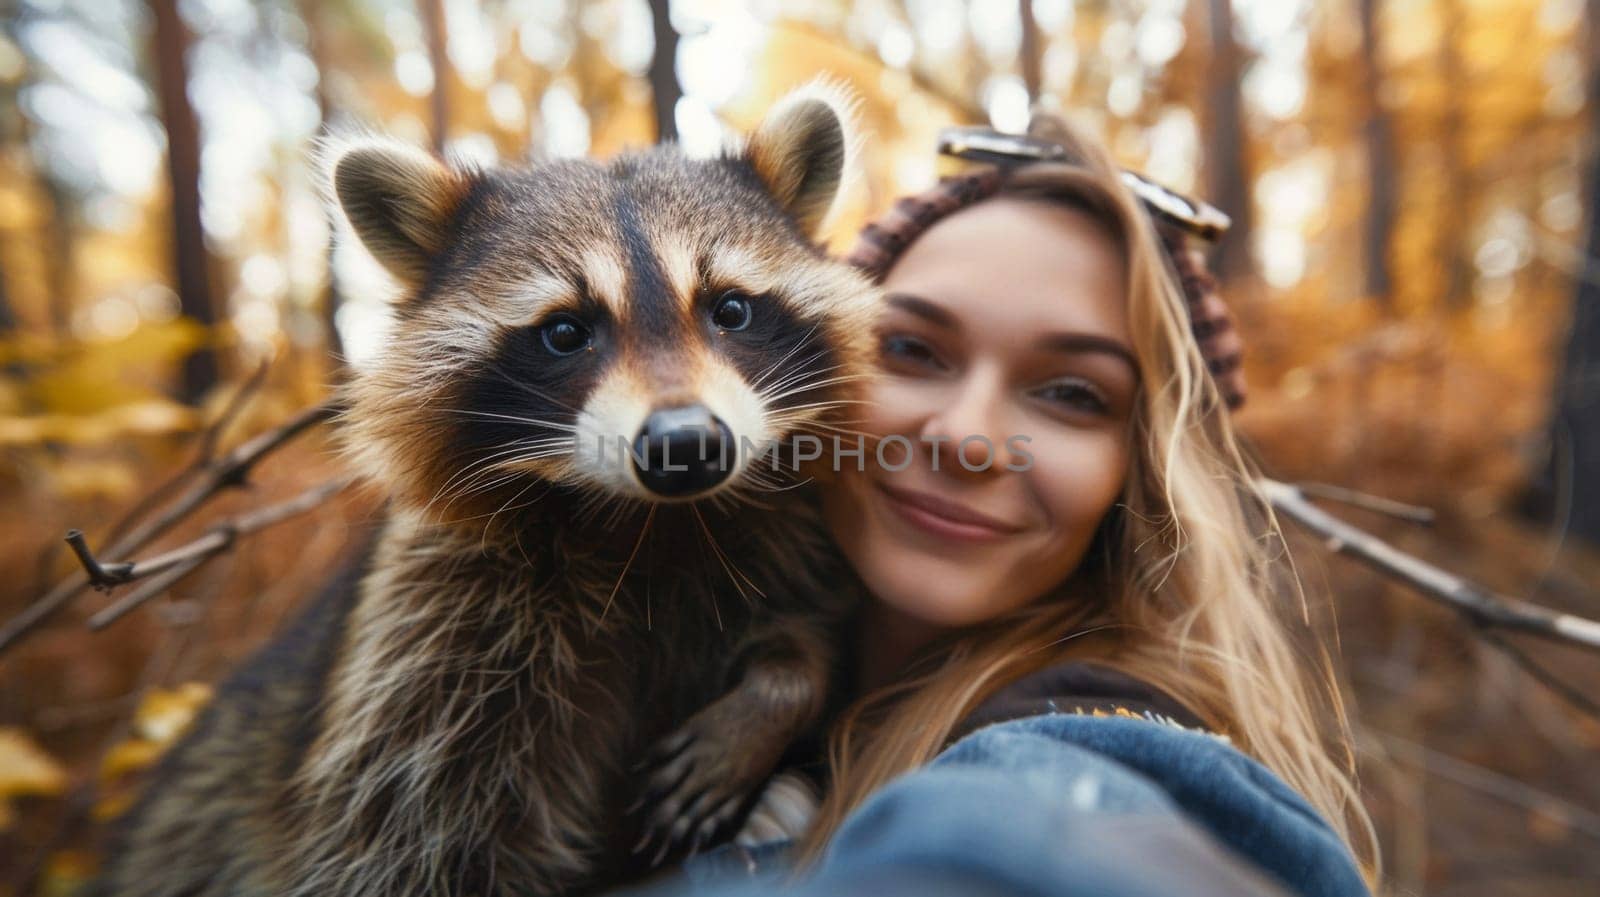 A woman taking a picture of herself with her pet raccoon